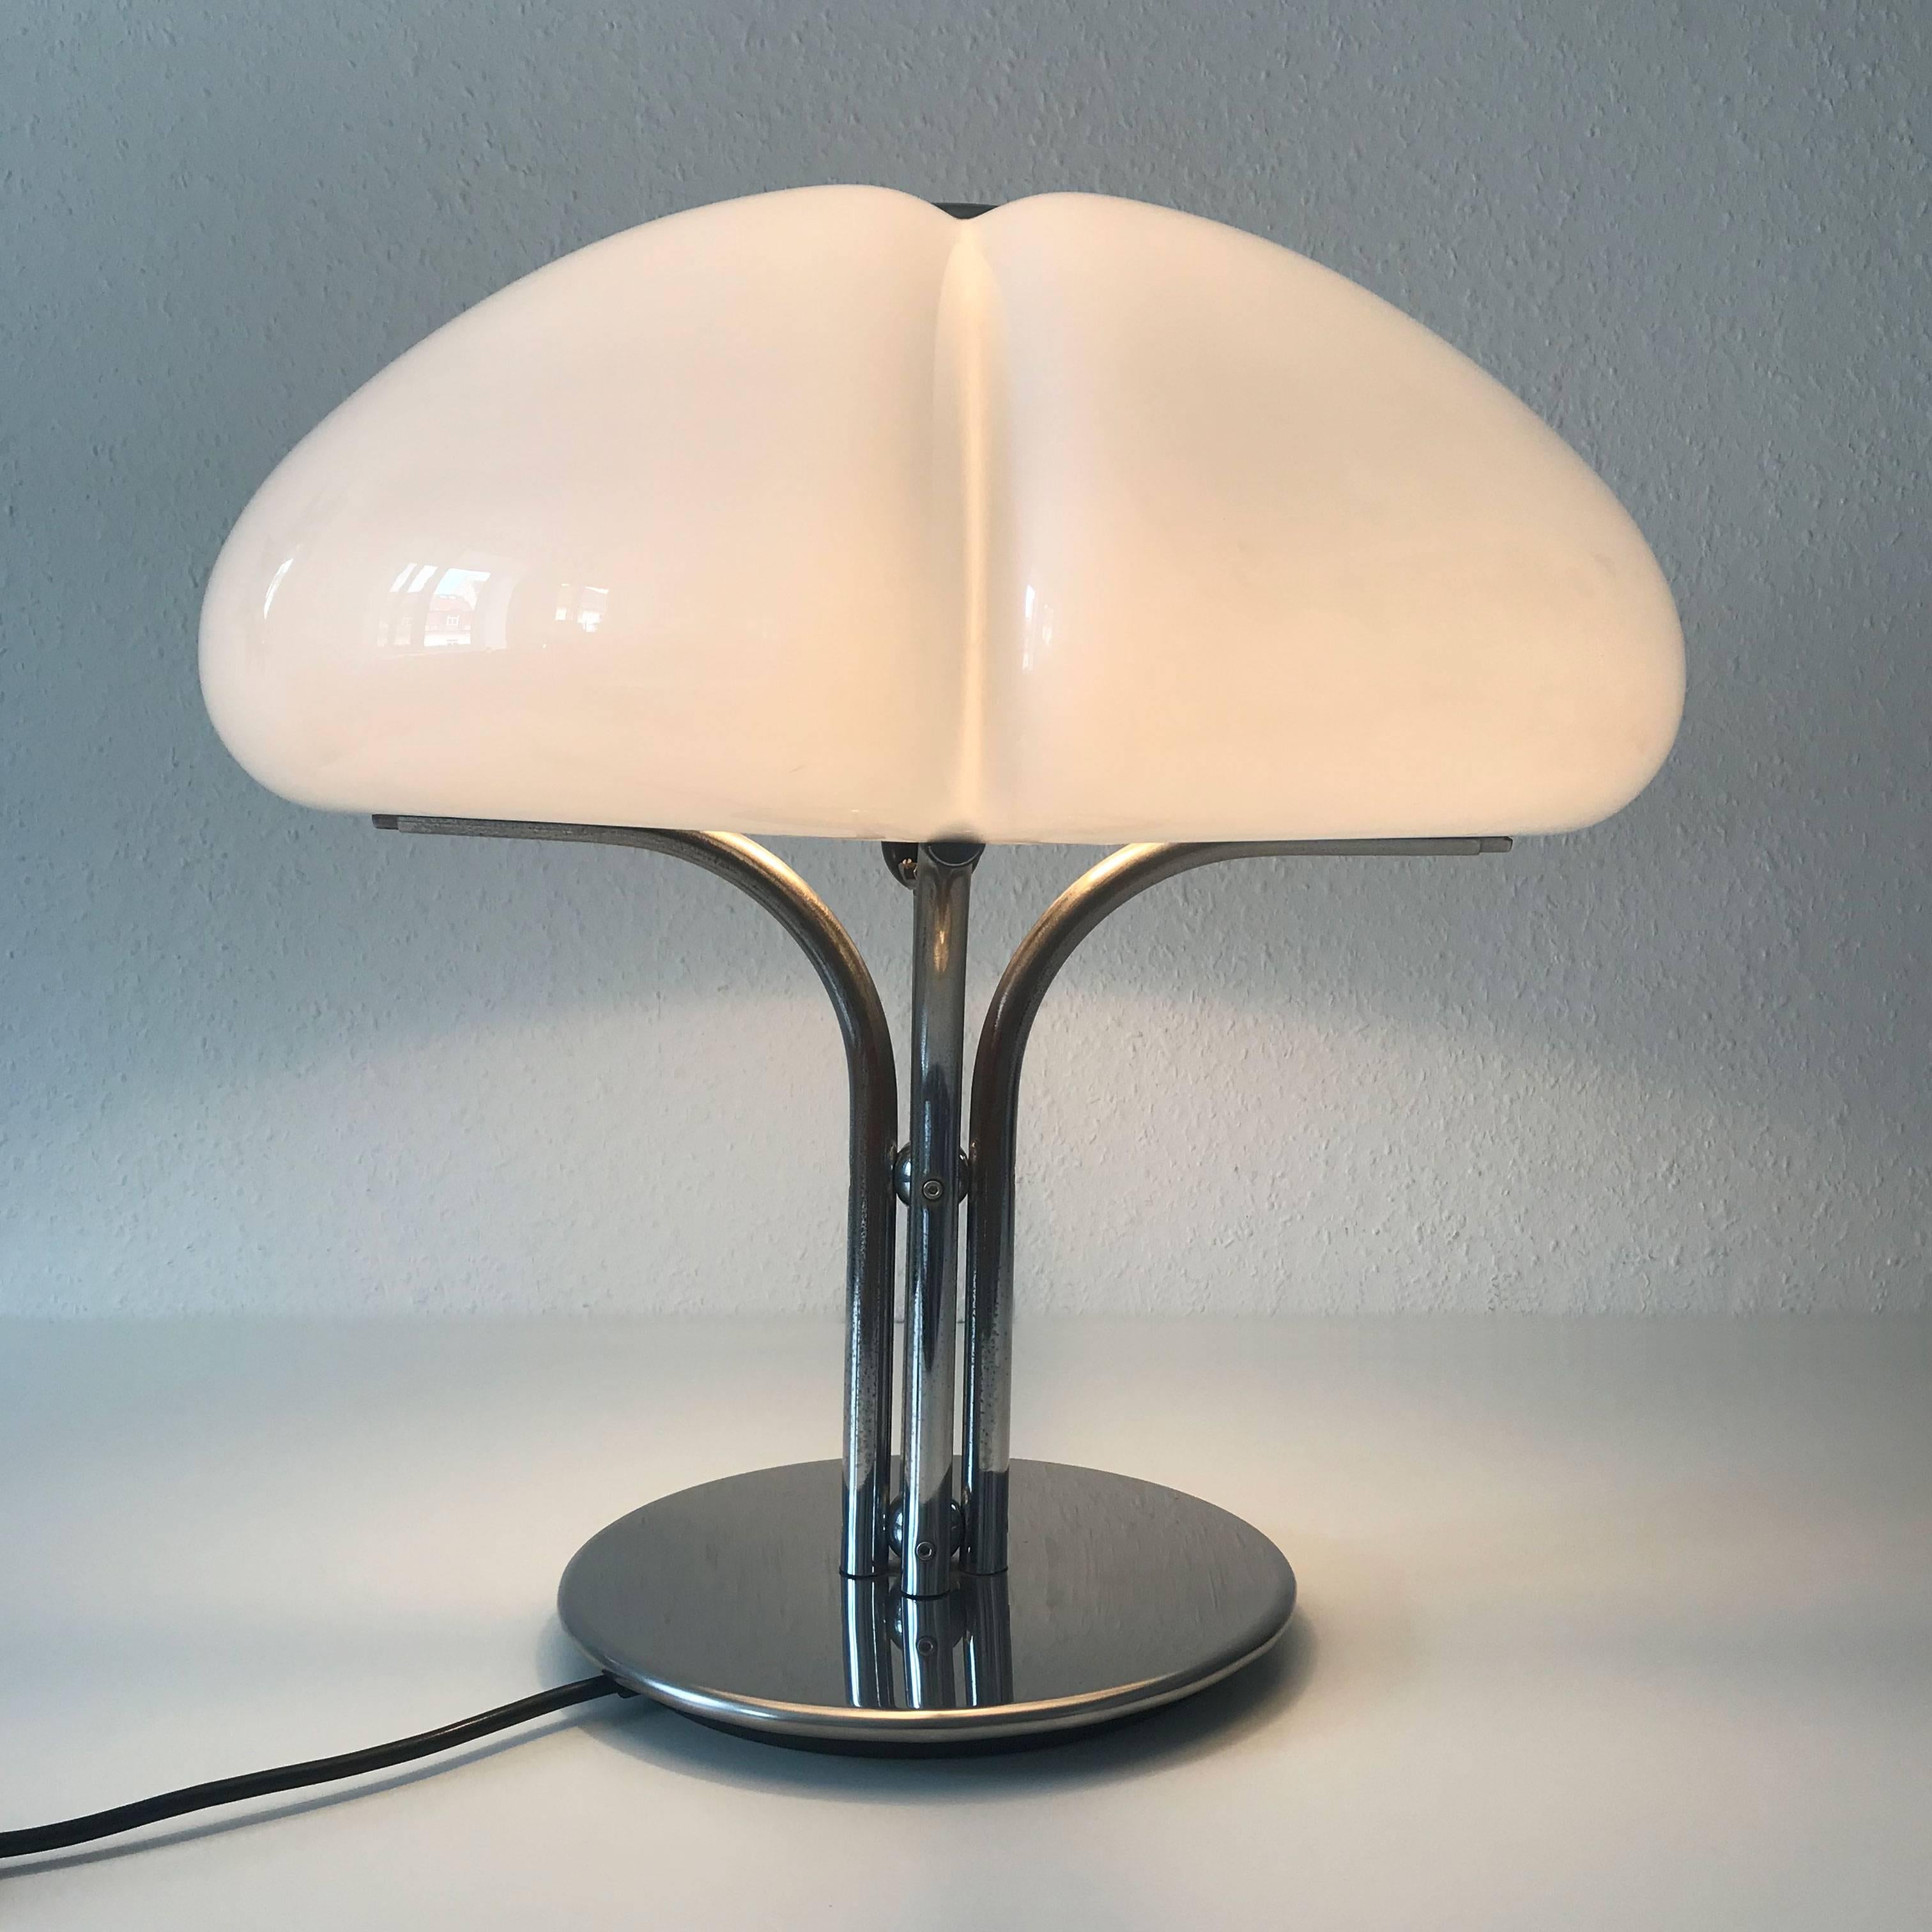 Amazing, rare and large Mid-Century Modern table lamp. Designed by Gae Aulenti in 1968. Manufactured by Harvey Luce or Harvey Guzzini in 1960s-1970s, Italy.

This most sought, elegant table lamp is executed with chrome-plated steel and